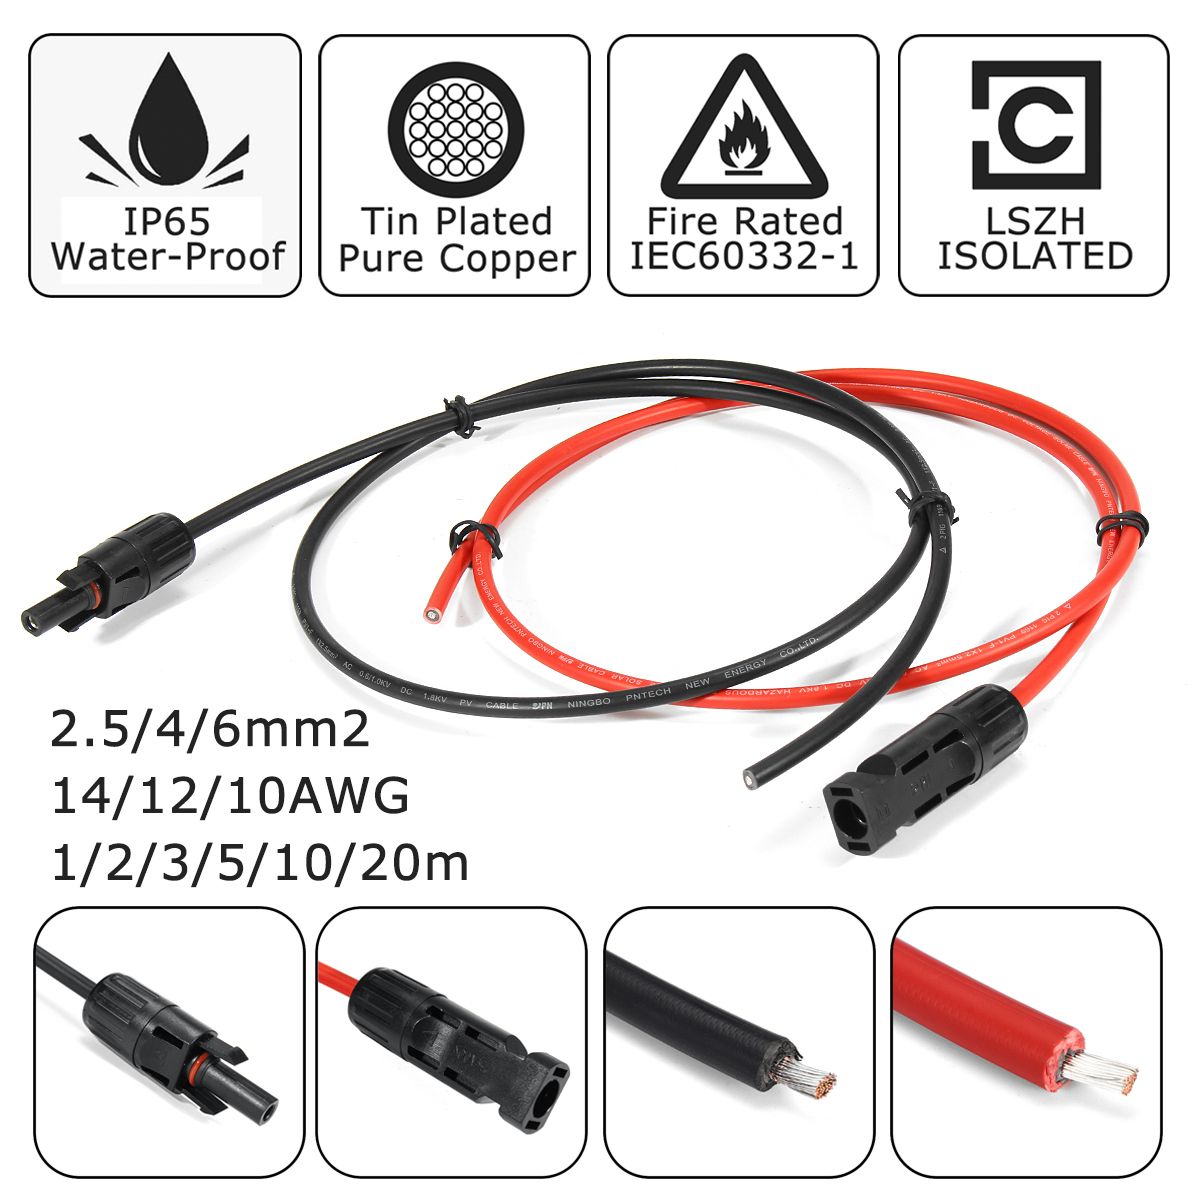 45A-1235M-4mmsup2-12AWG-Eternal-6mm-Solar-Panel-Extension-Cable-Wire-MC4-Connector-Copper-Wire-Solar-1479416